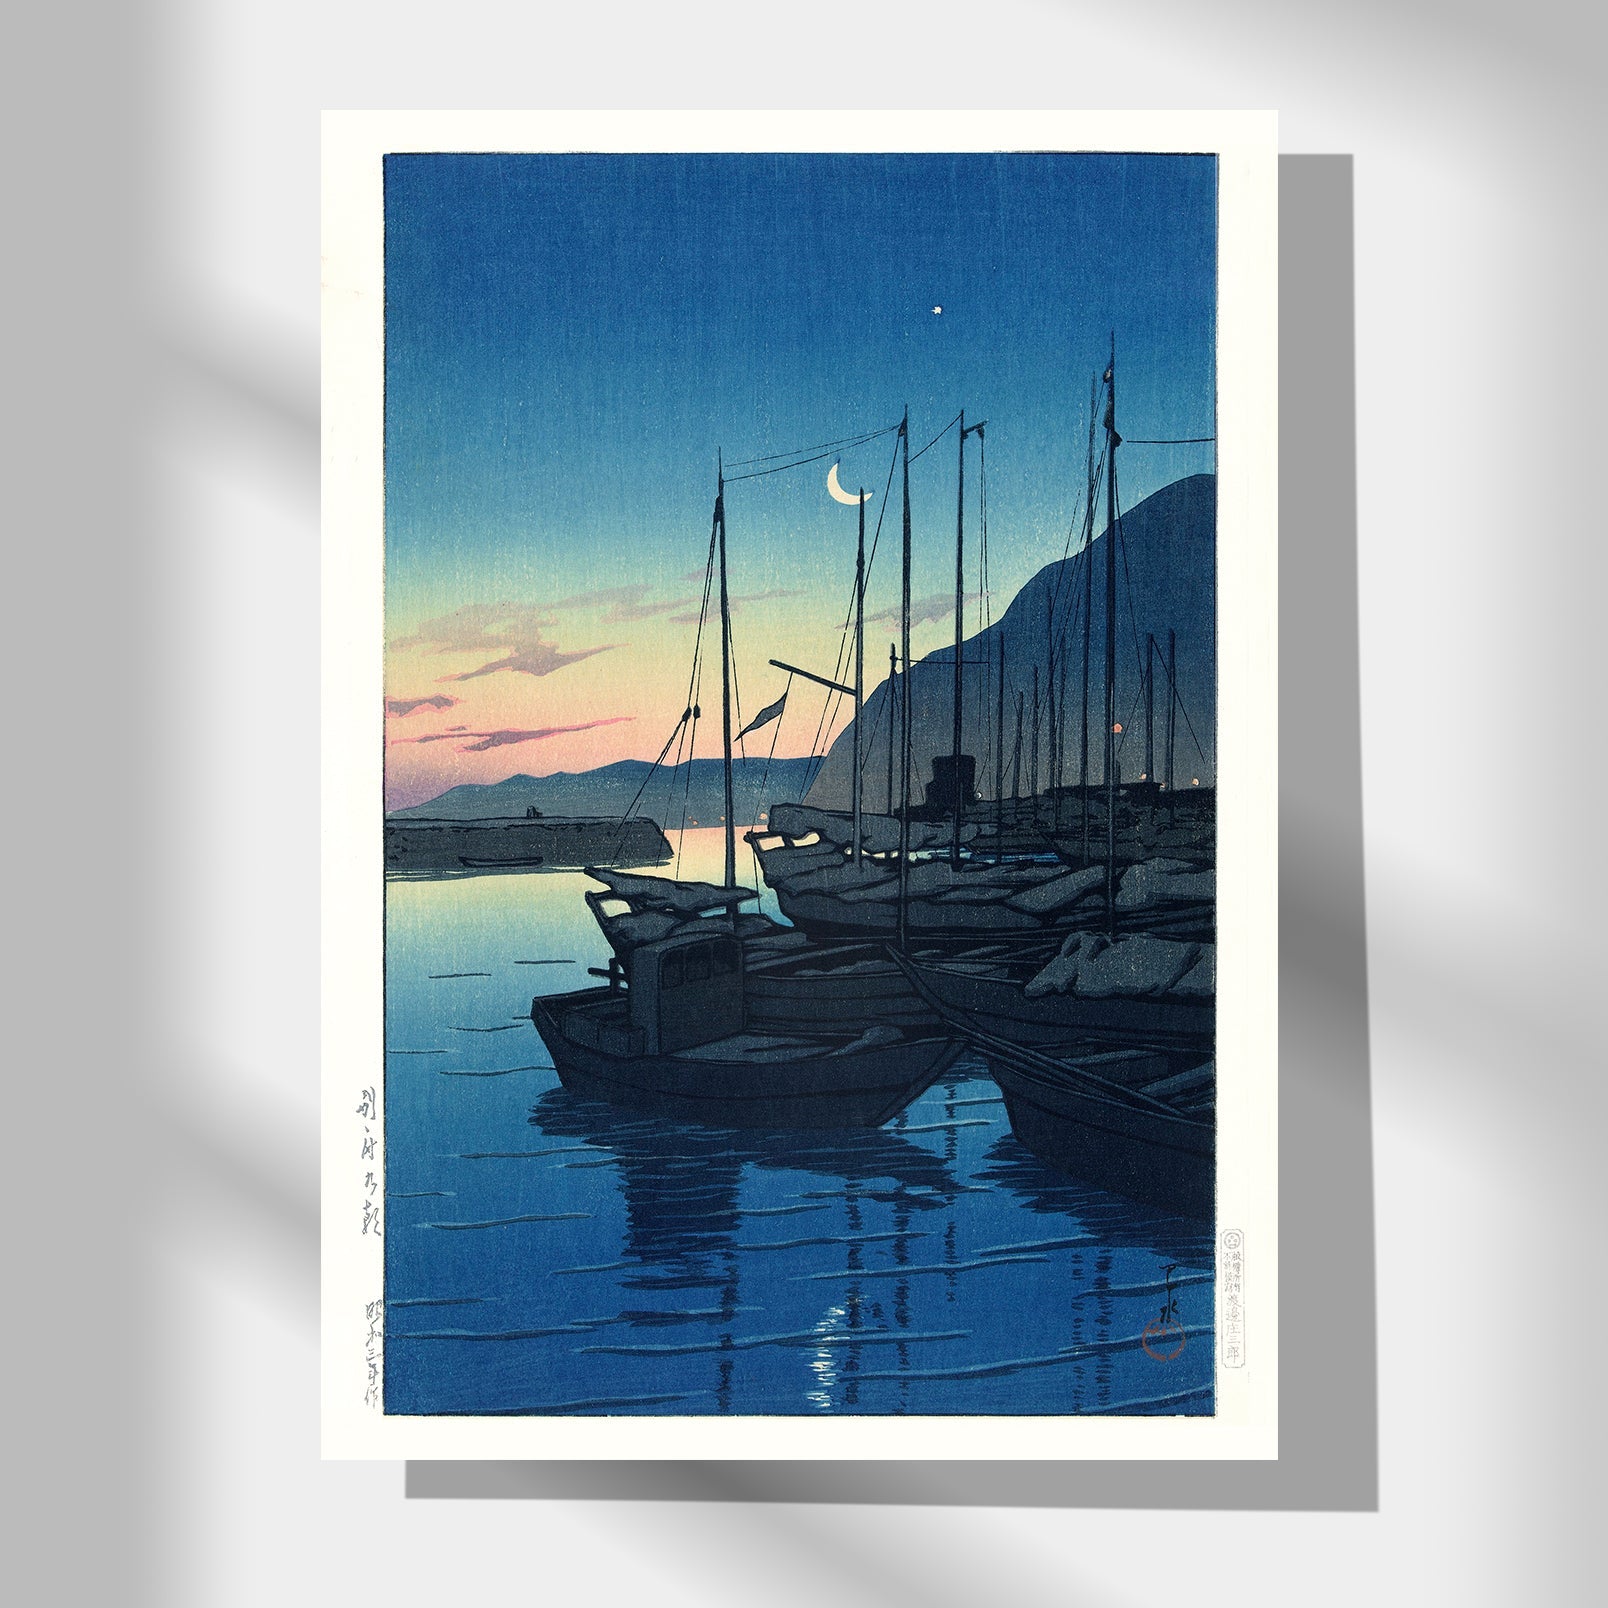 Japanese Art Poster by Kawase Hasui featuring boats in water at morning